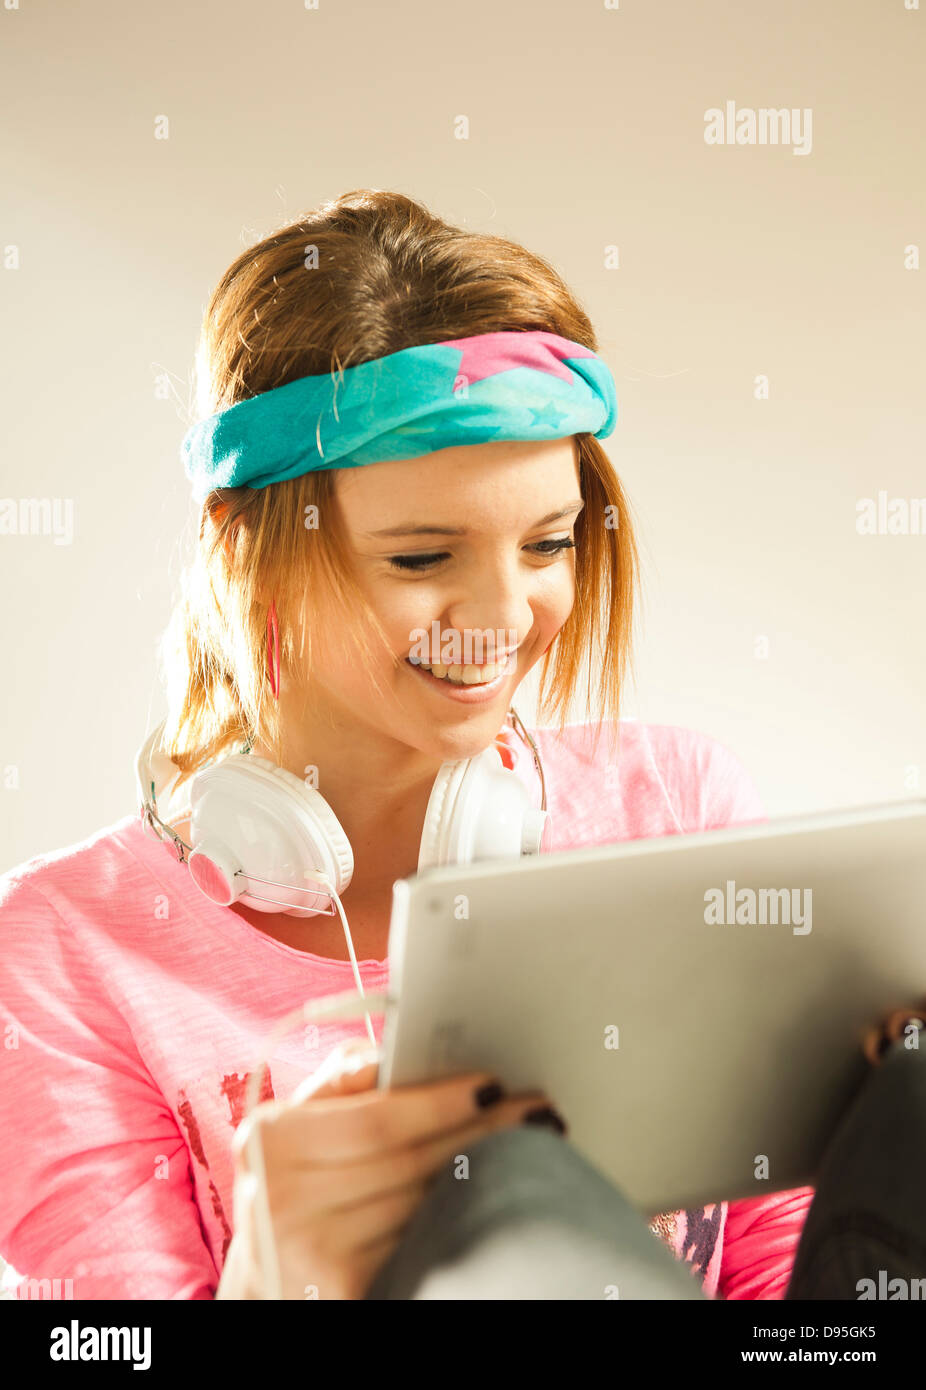 Head and shoulders portrait of teenage girl wearing a headband, headphones and using a tablet in studio. Stock Photo